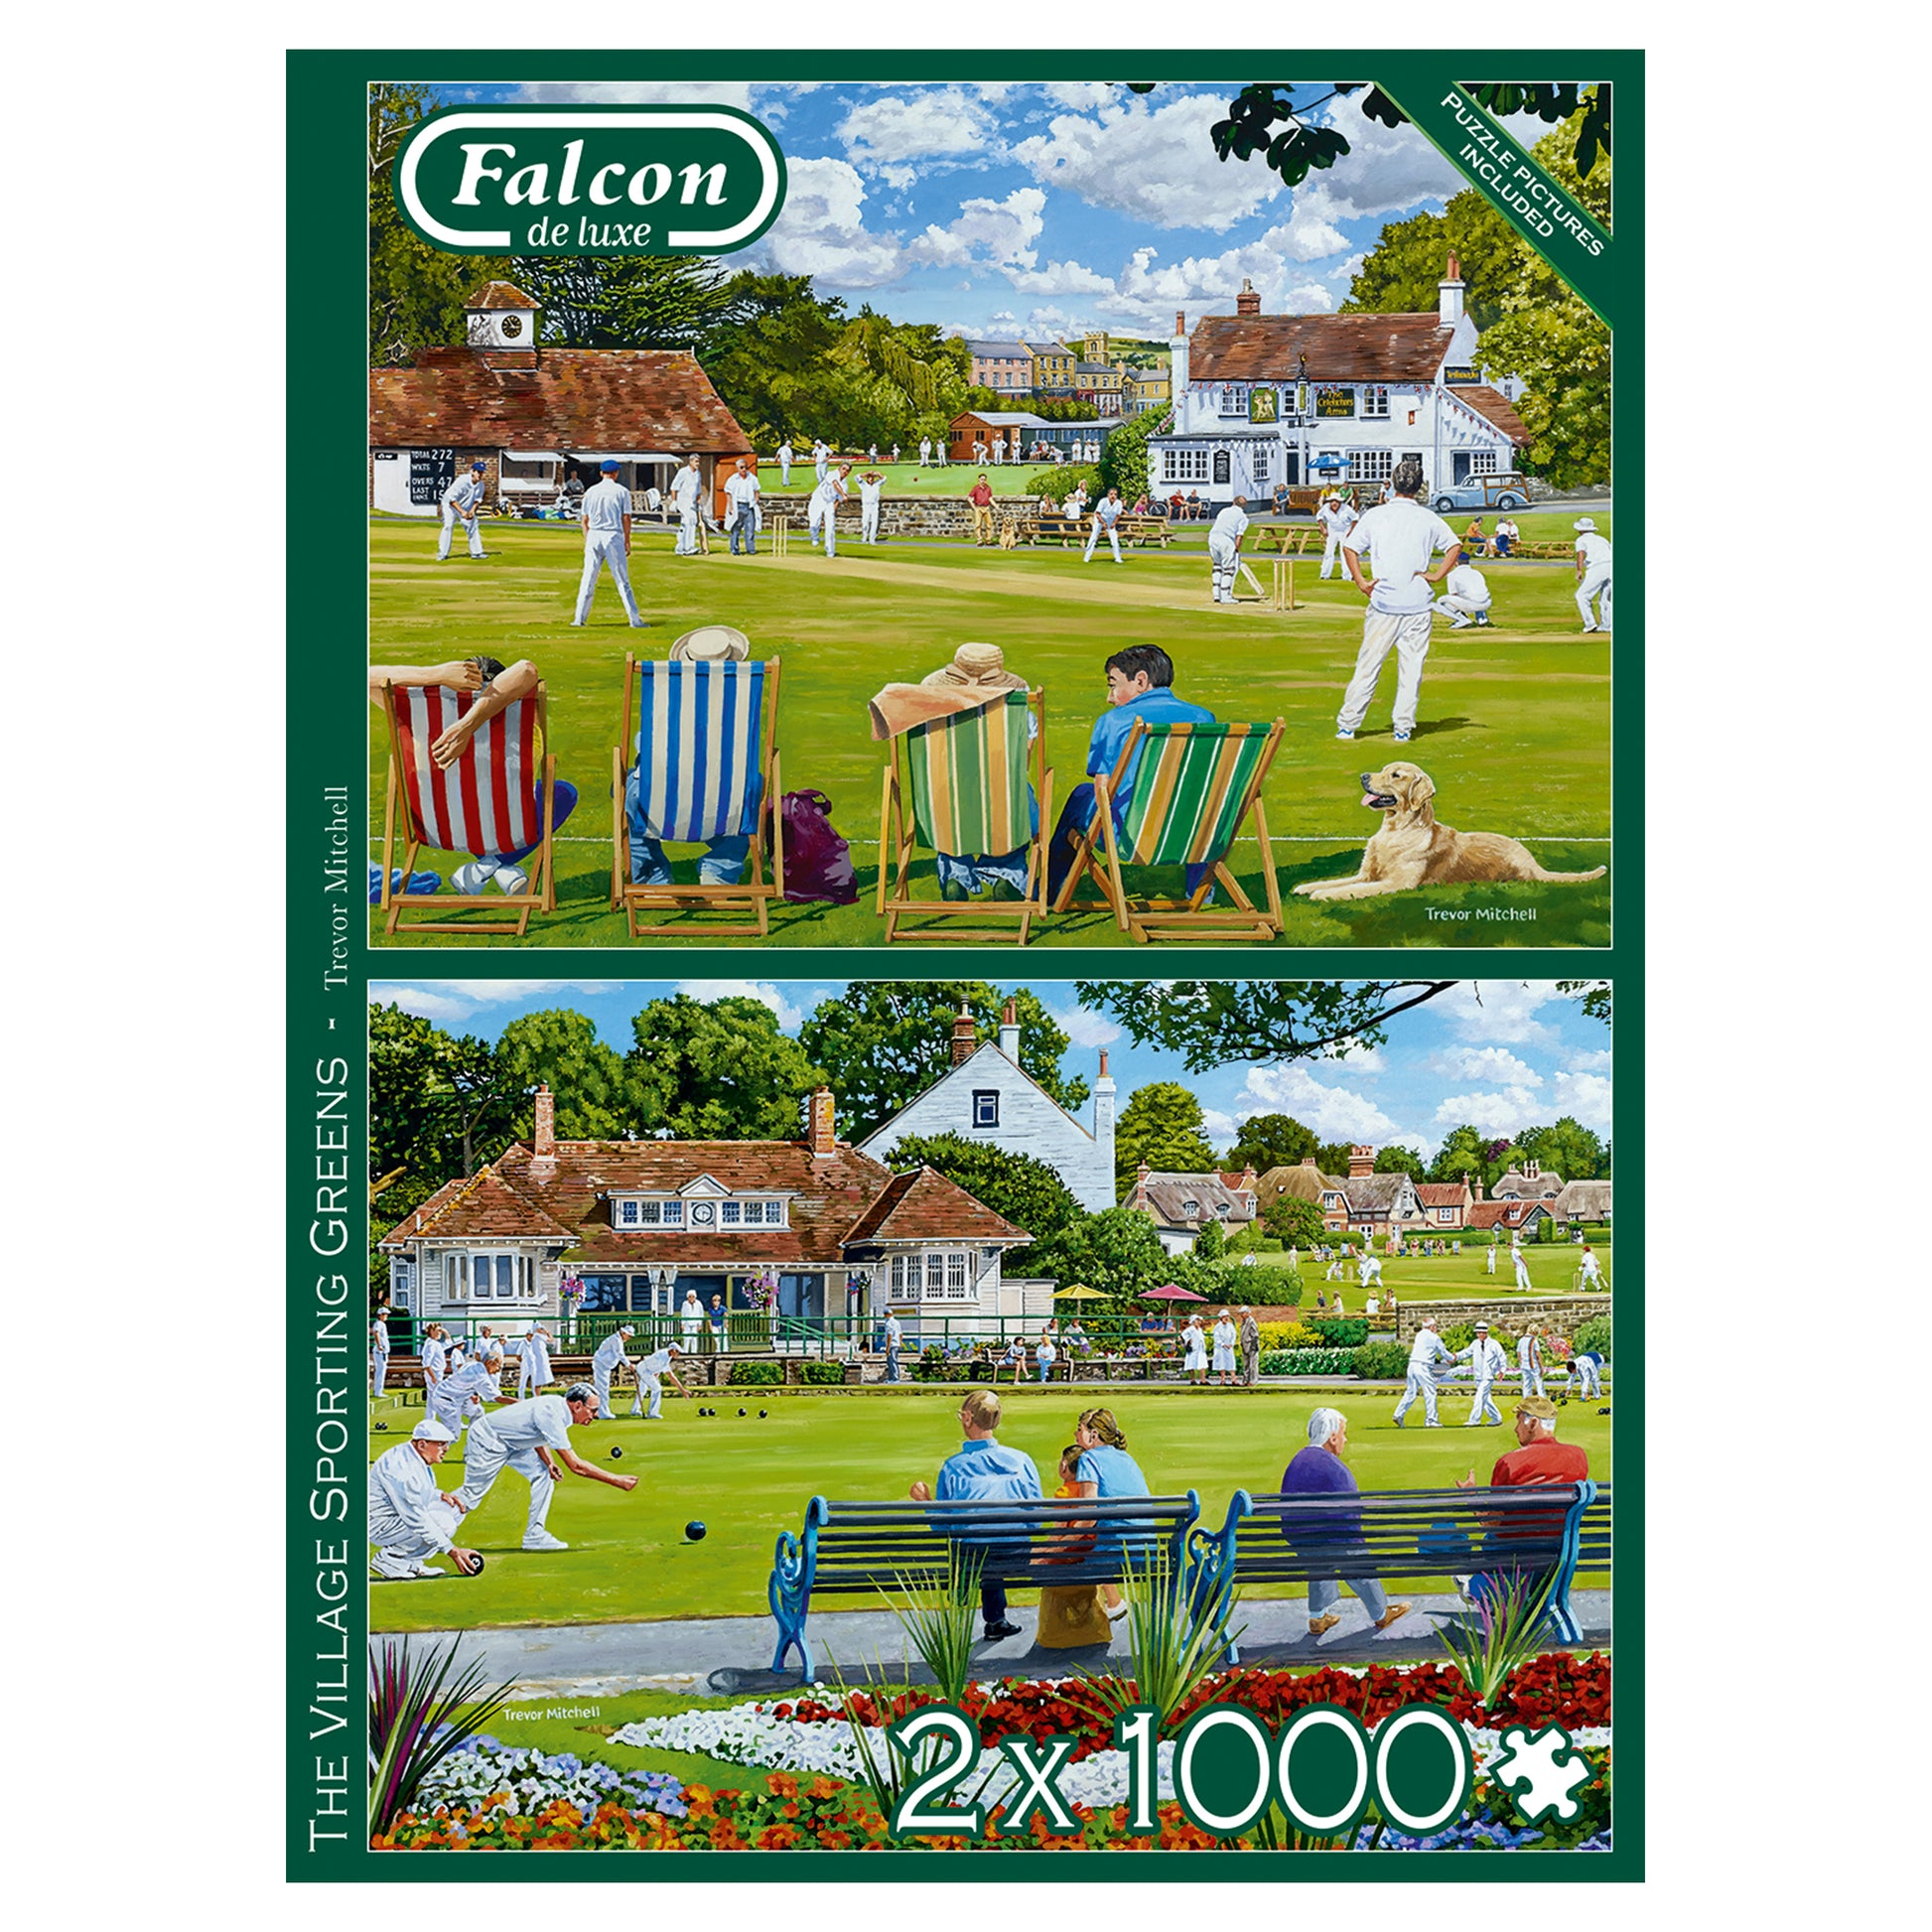 Falcon - The Village Sporting Greens (2x1000 pieces) - product image - Jumboplay.com